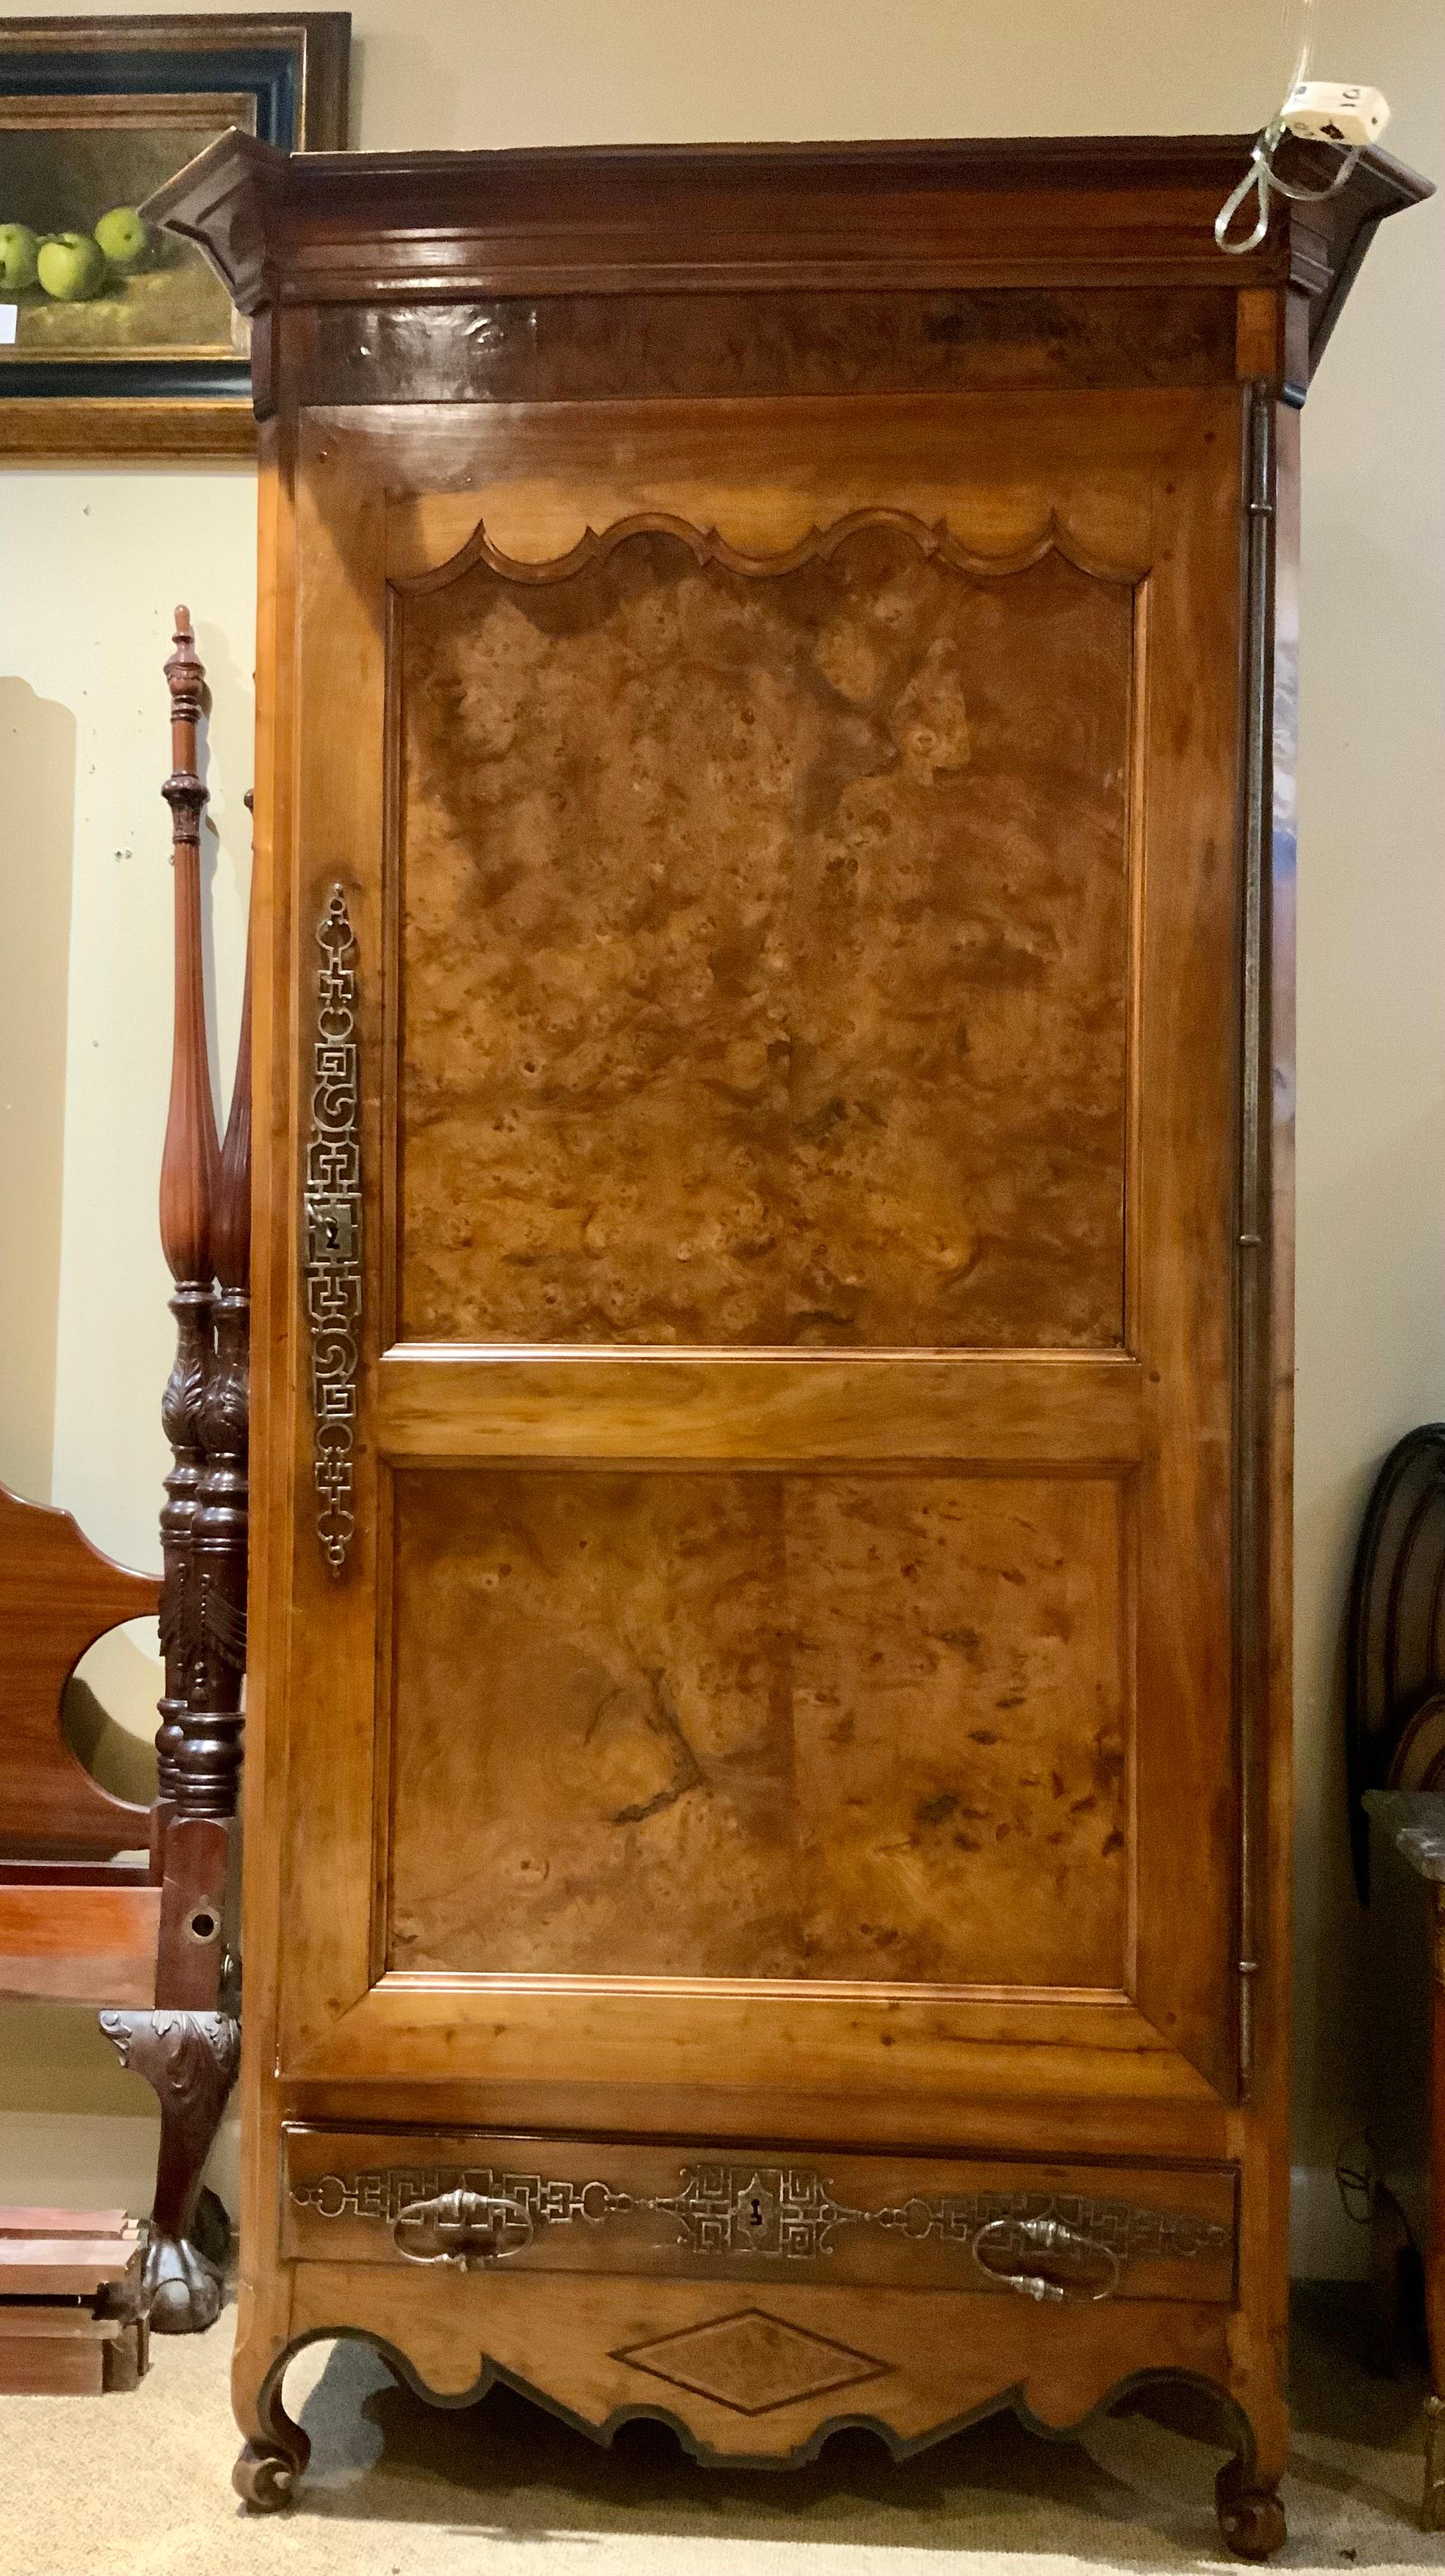 This bonnetiere/armoire is made of burled walnut and fruitwood 
It has long full length hinged door that opens to two
Shelves. Shelves are easily removable if you prefer
To add a rod for hanging garments. It has one drawer
At the bottom that slides